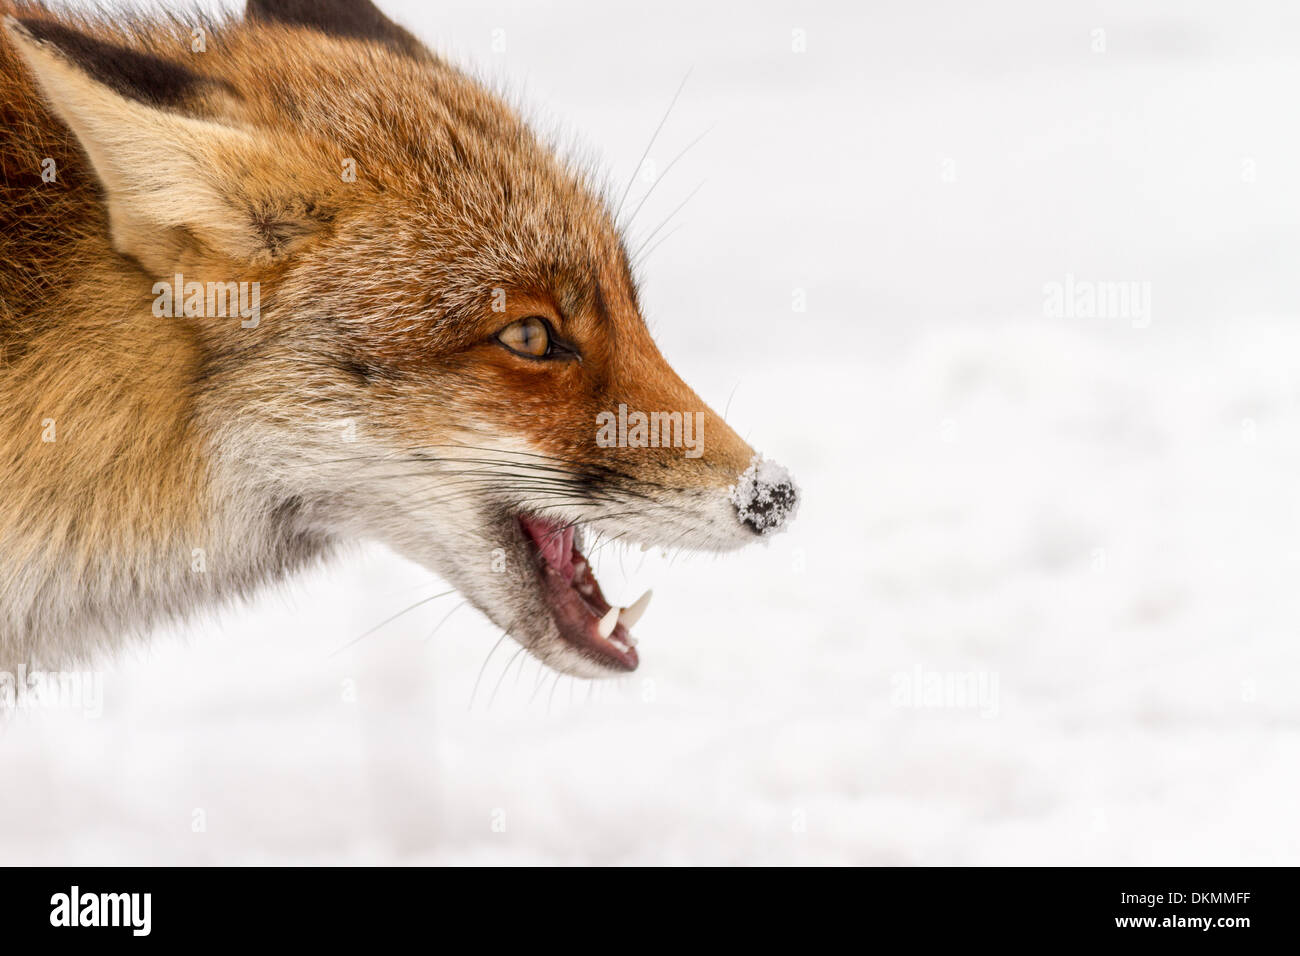 Fox is a common name for many species of alert omnivorous mammals belonging to the Canidae family Stock Photo